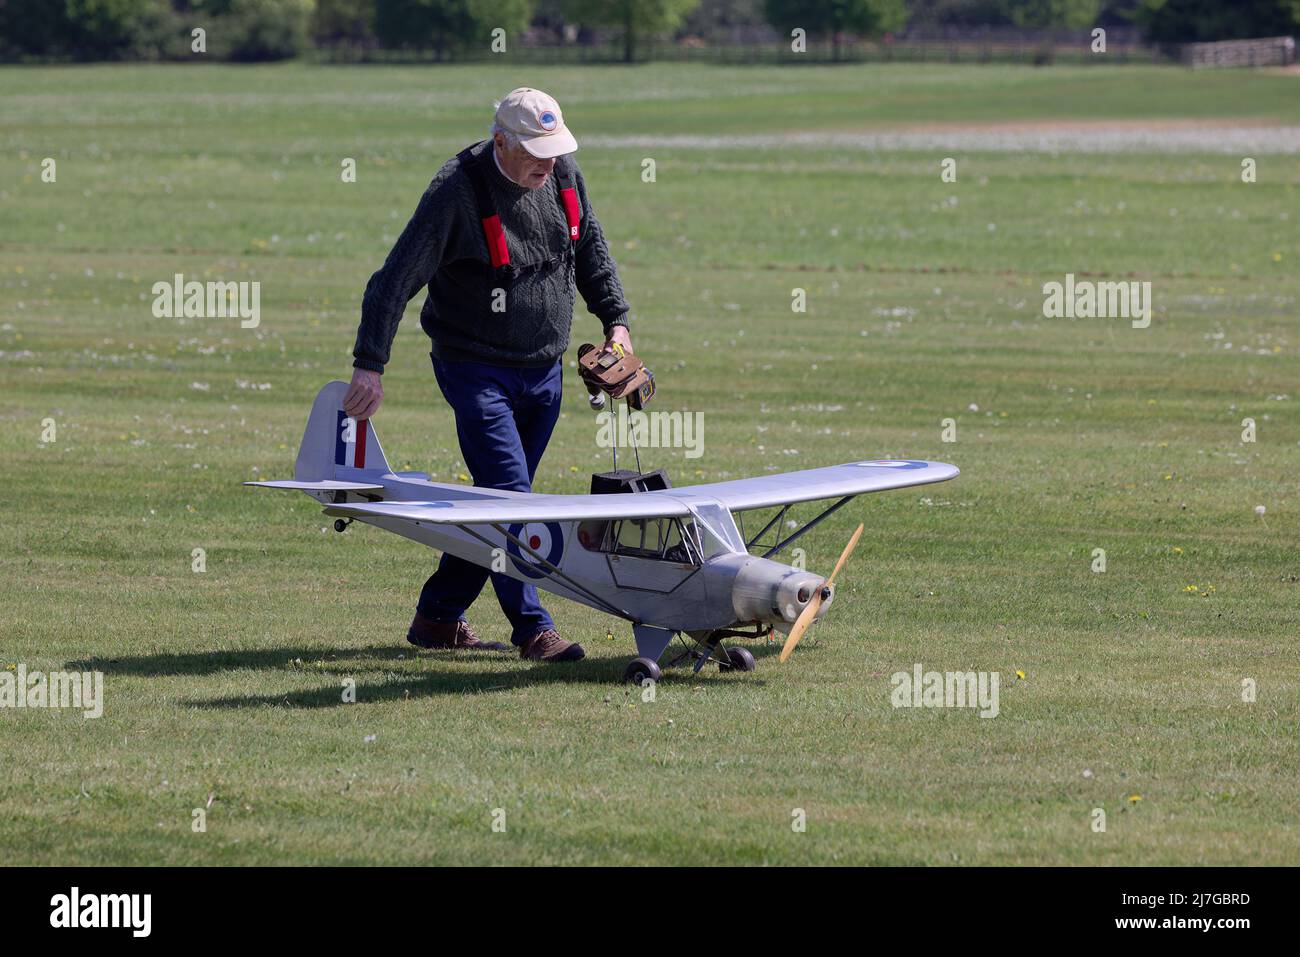 First Festival of Flight in the 2022 season of Model Air Craft at Shuttleworth Sun 8th May 2022 Stock Photo